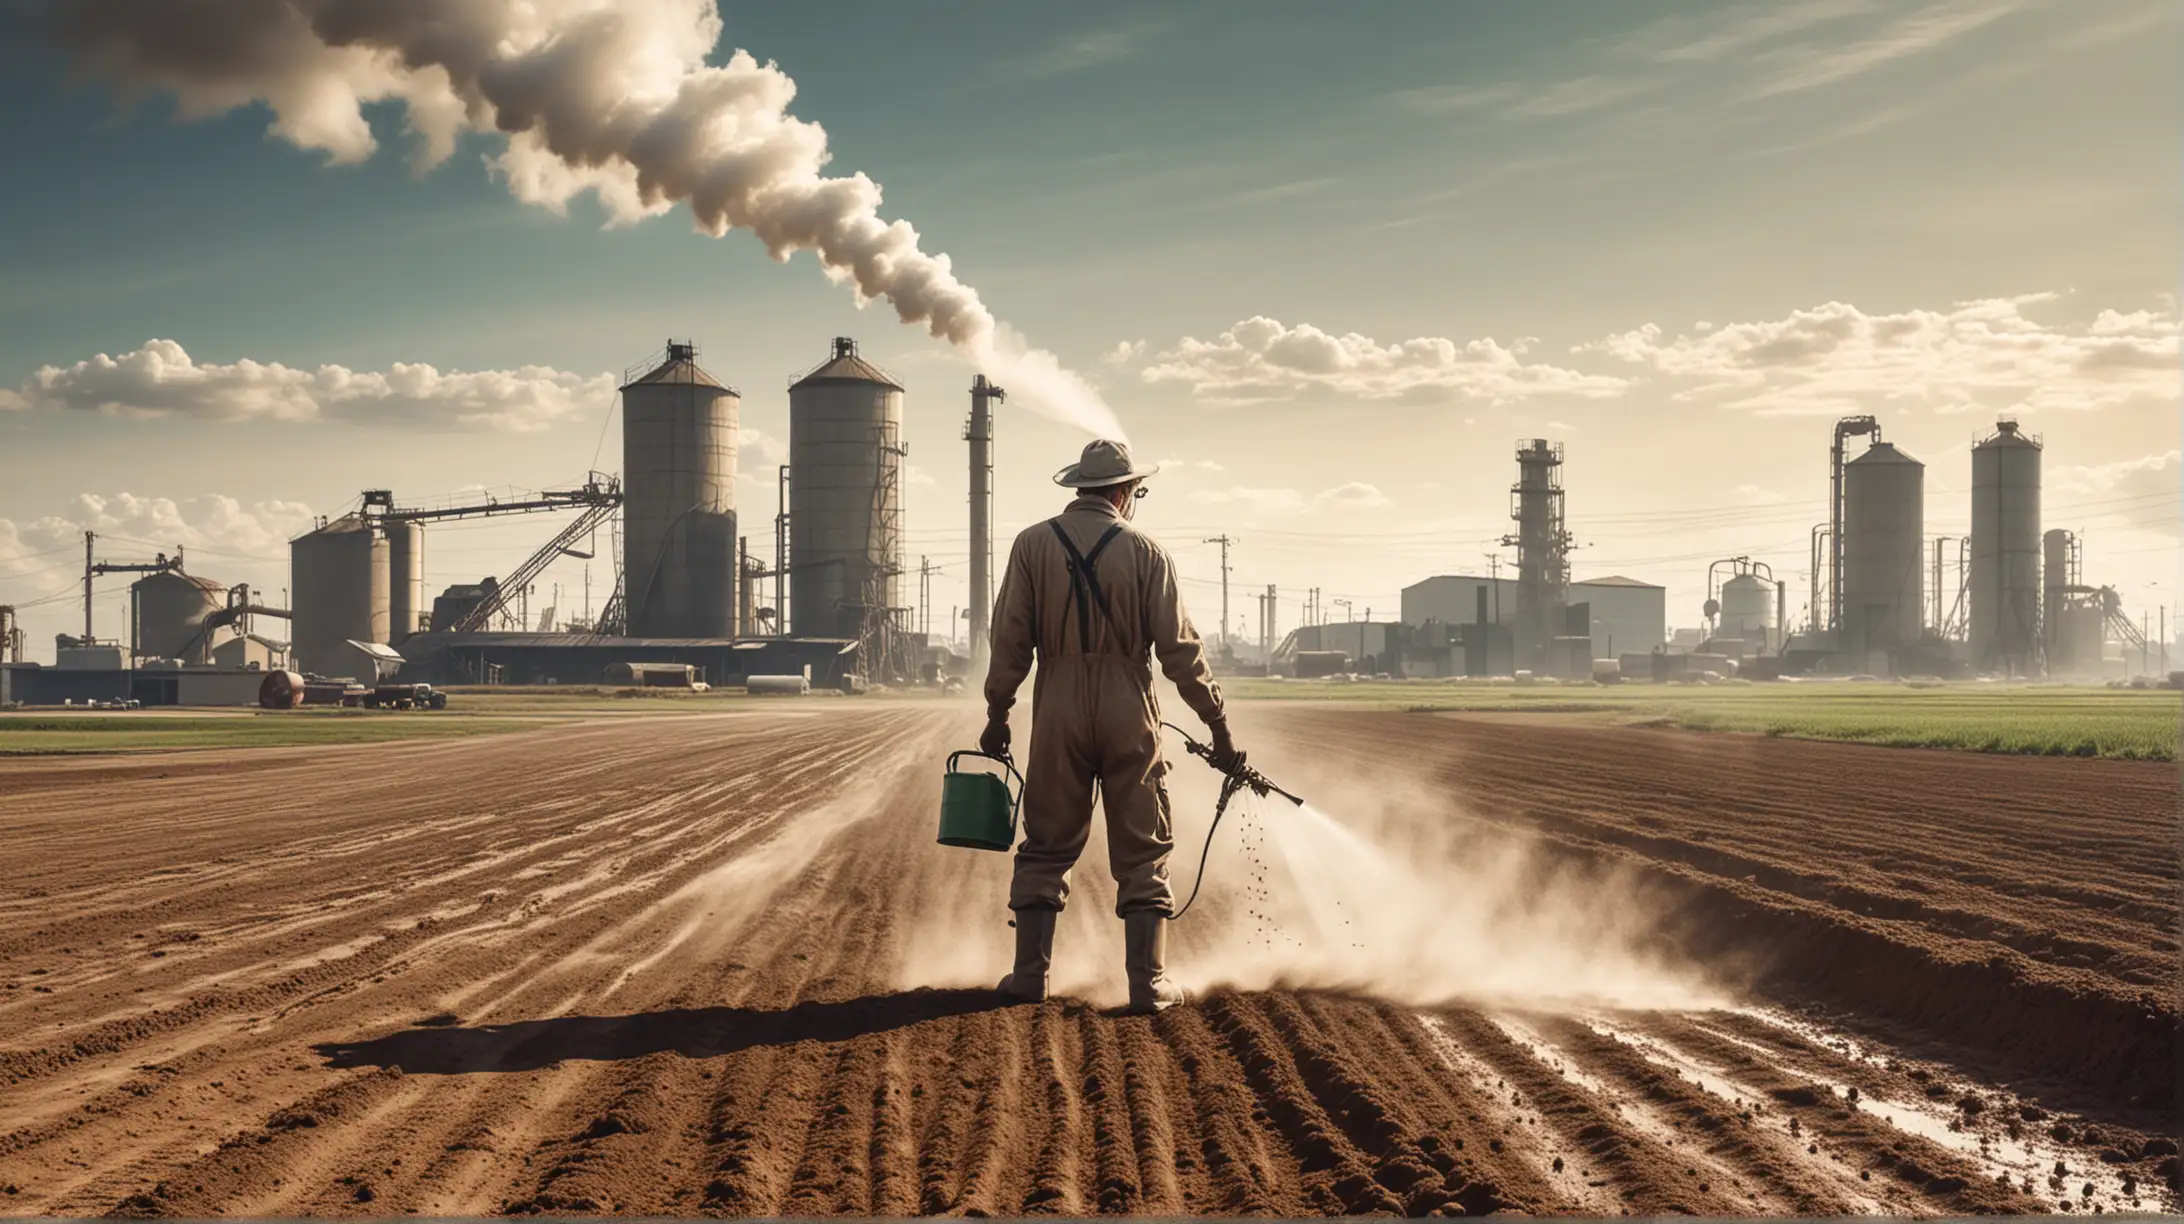 Surrealist Farmer Spraying Pesticides with Unhealthy Soil and Industrial Factory